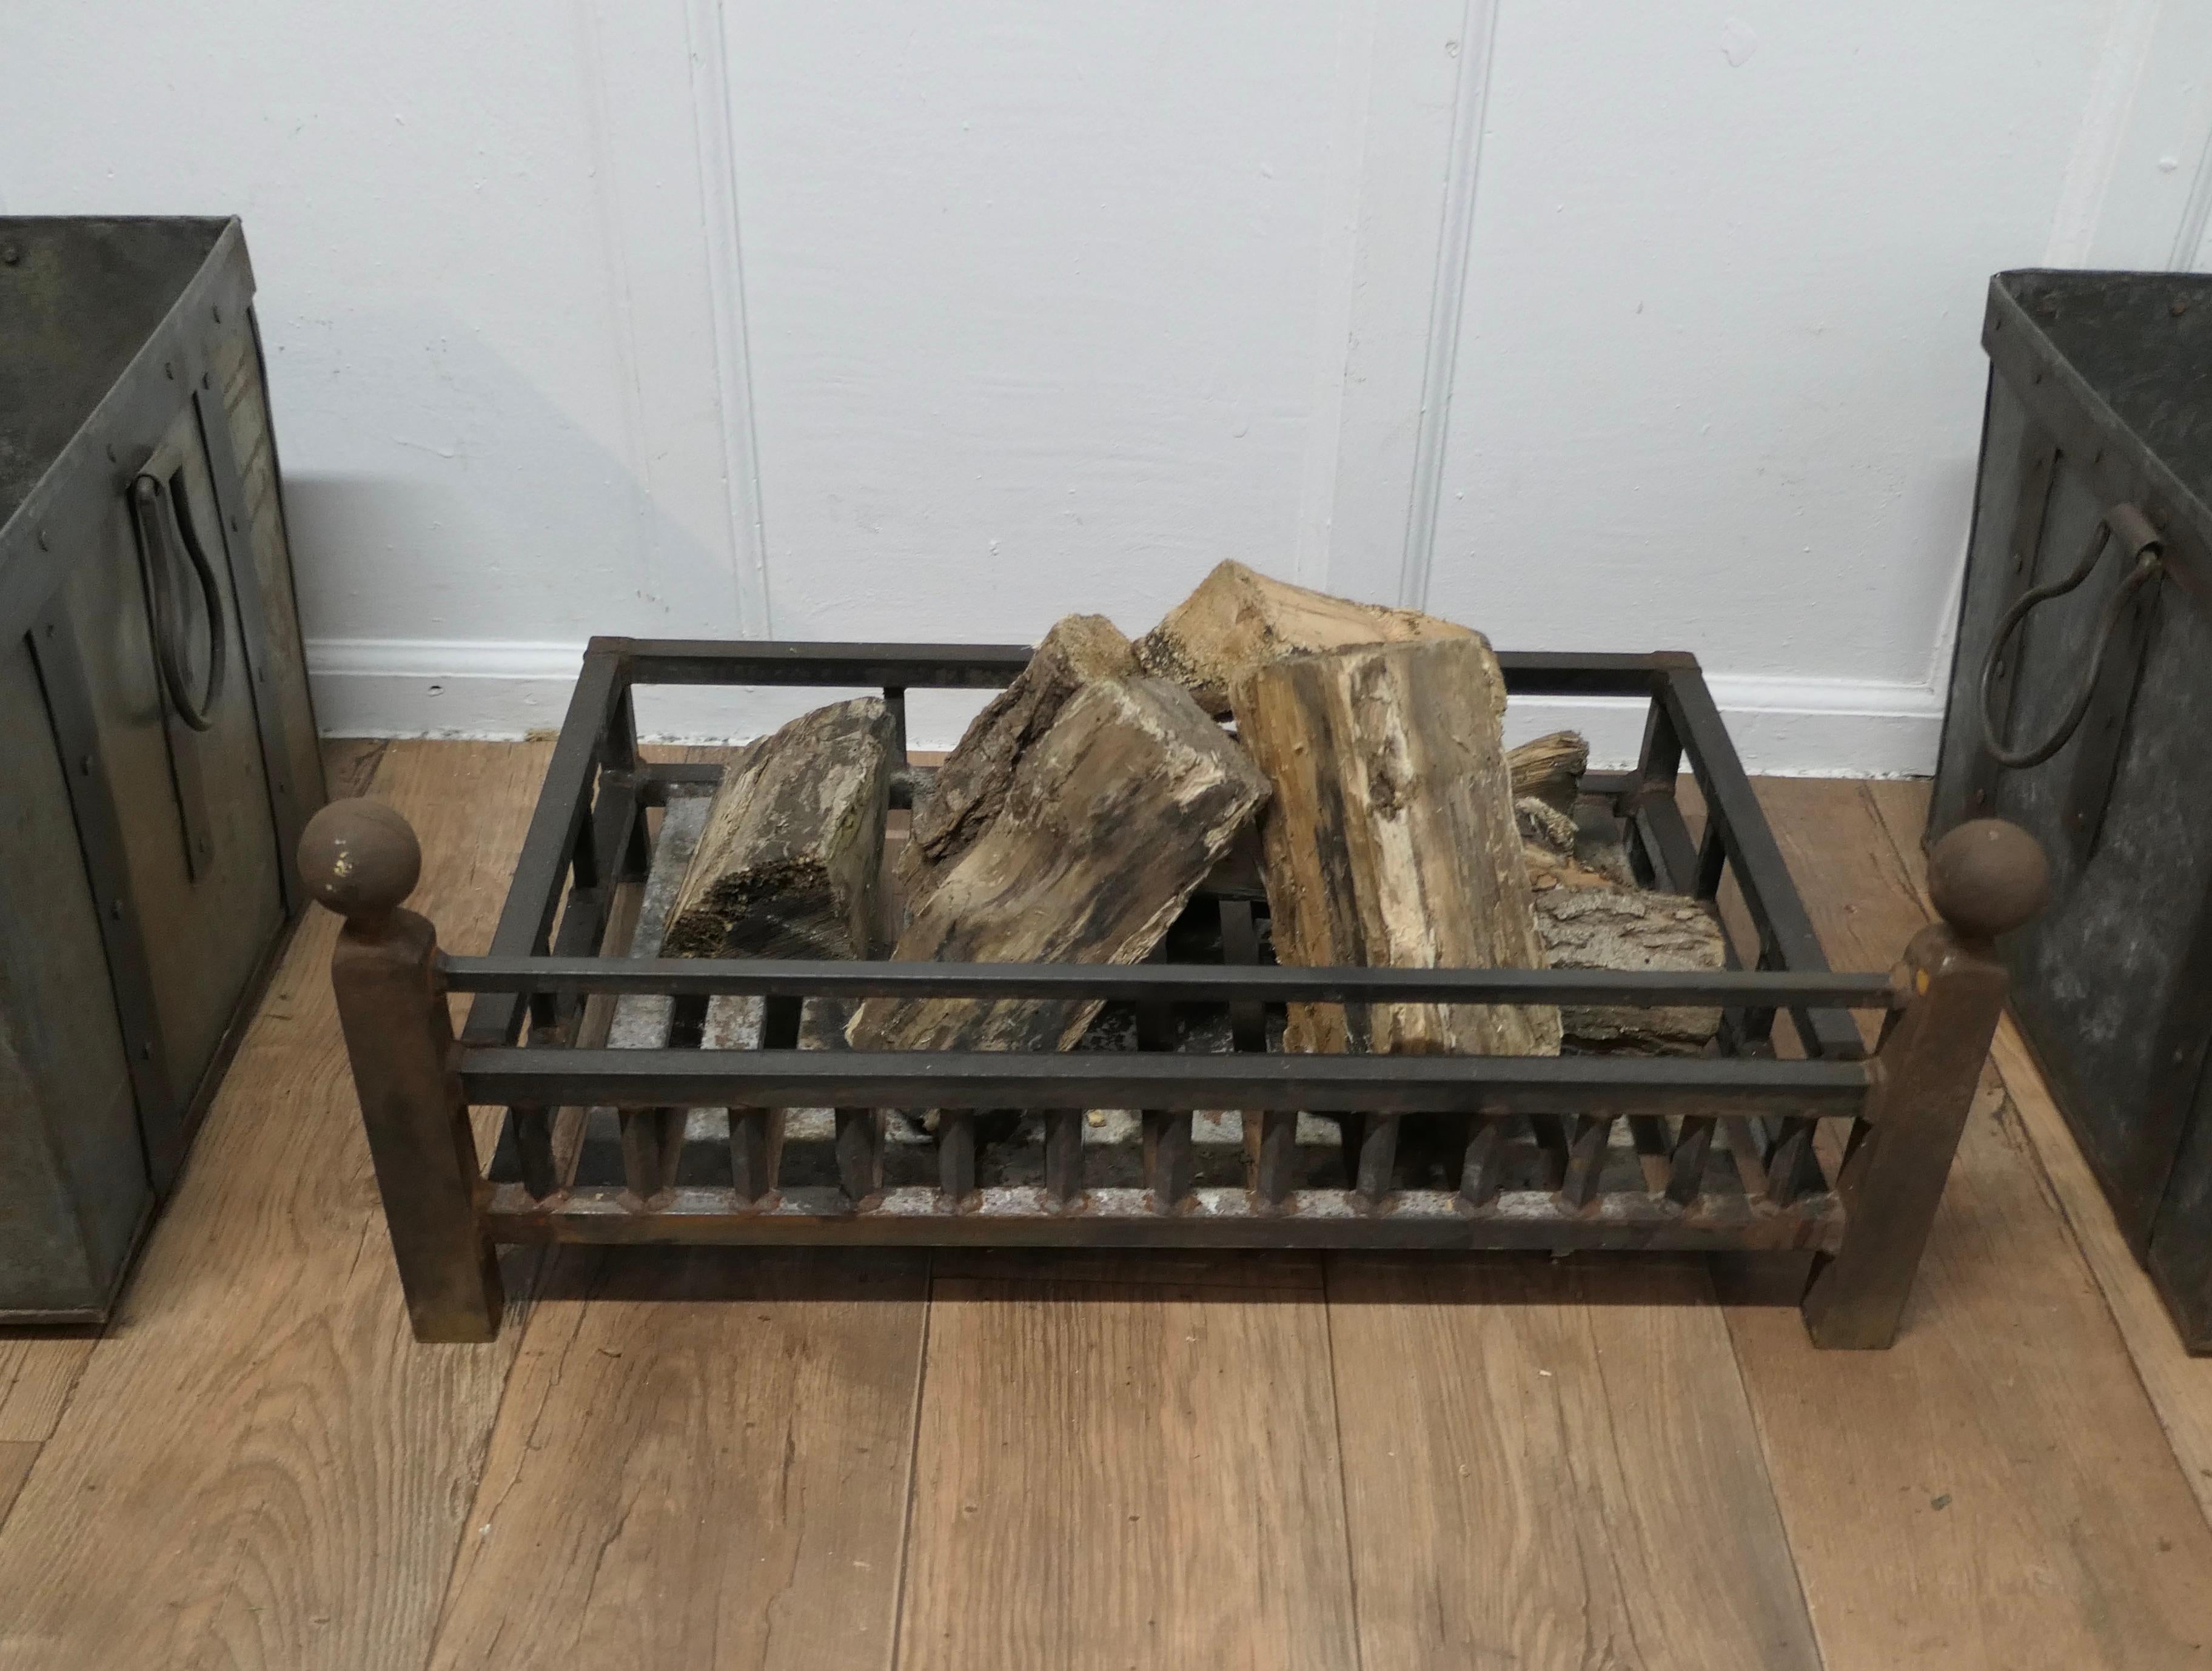 Inglenook Iron Fire Grate  

The grate is made in iron with rails all around, this is a very heavy and sturdy piece, it is in good used condition
The grate is 29” long  17” deep and 12” high, 
TSC112 